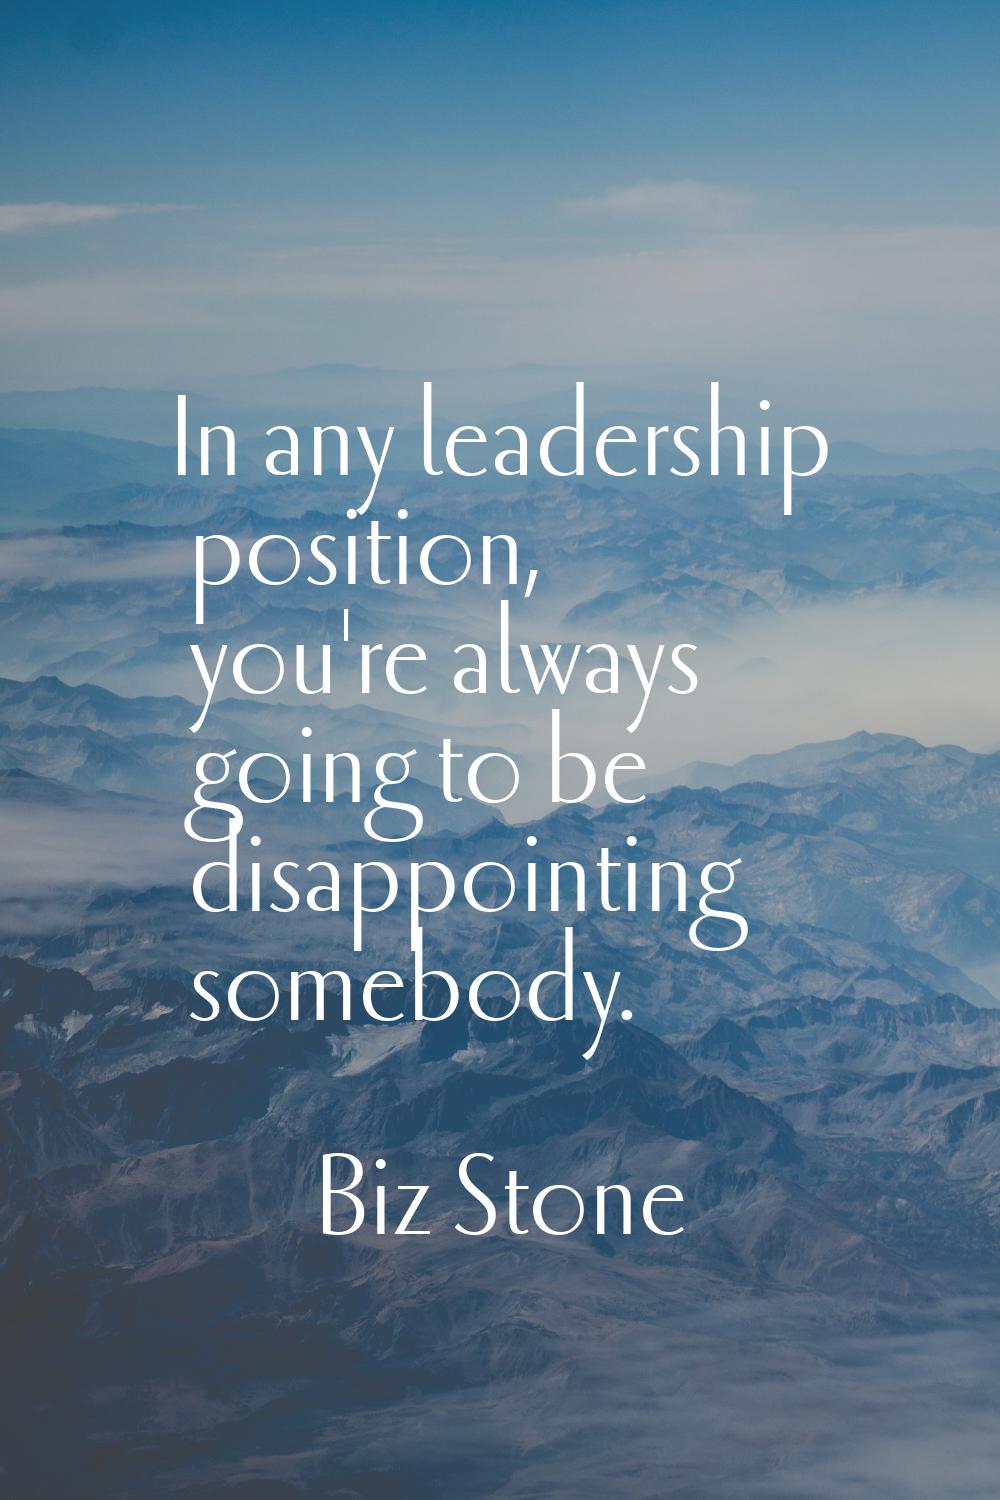 In any leadership position, you're always going to be disappointing somebody.